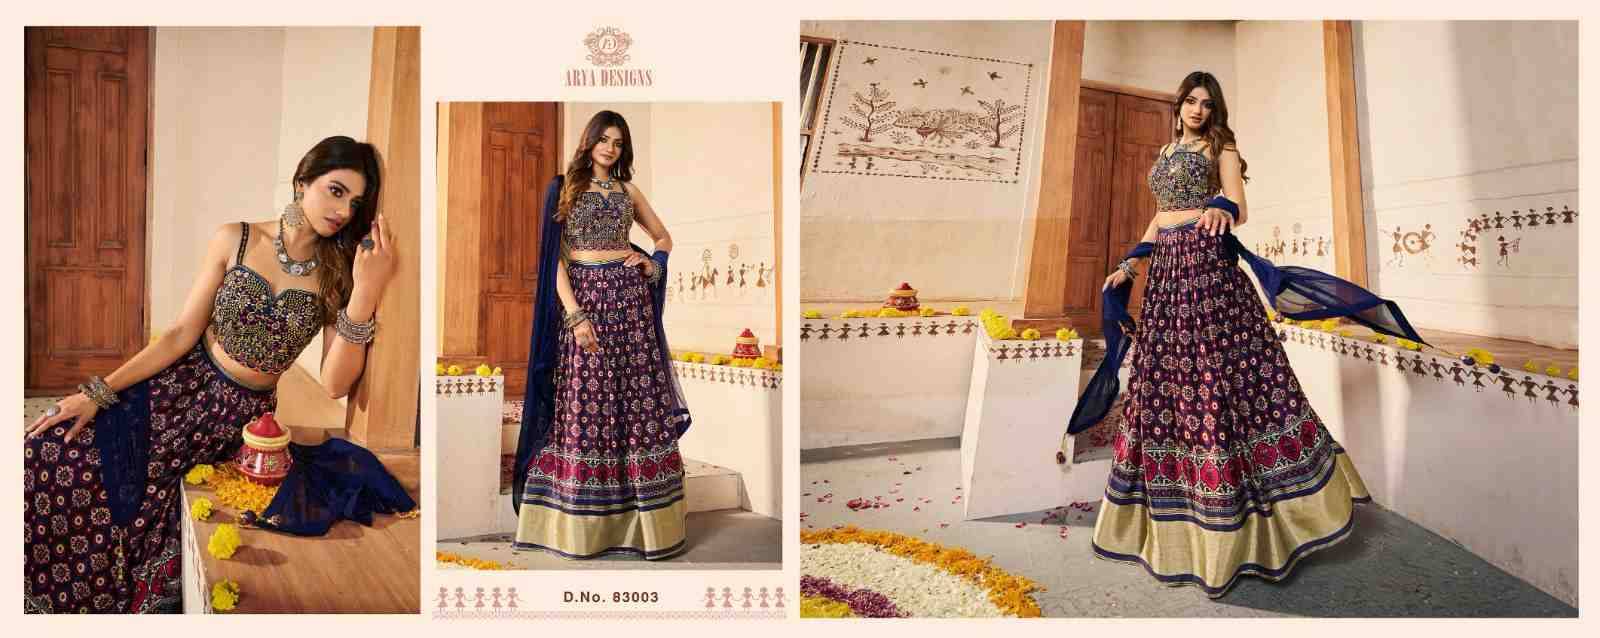 Ramzat By Arya Designs 83001 To 83006 Series Bridal Wear Collection Beautiful Stylish Colorful Fancy Party Wear & Occasional Wear Silk Lehengas At Wholesale Price